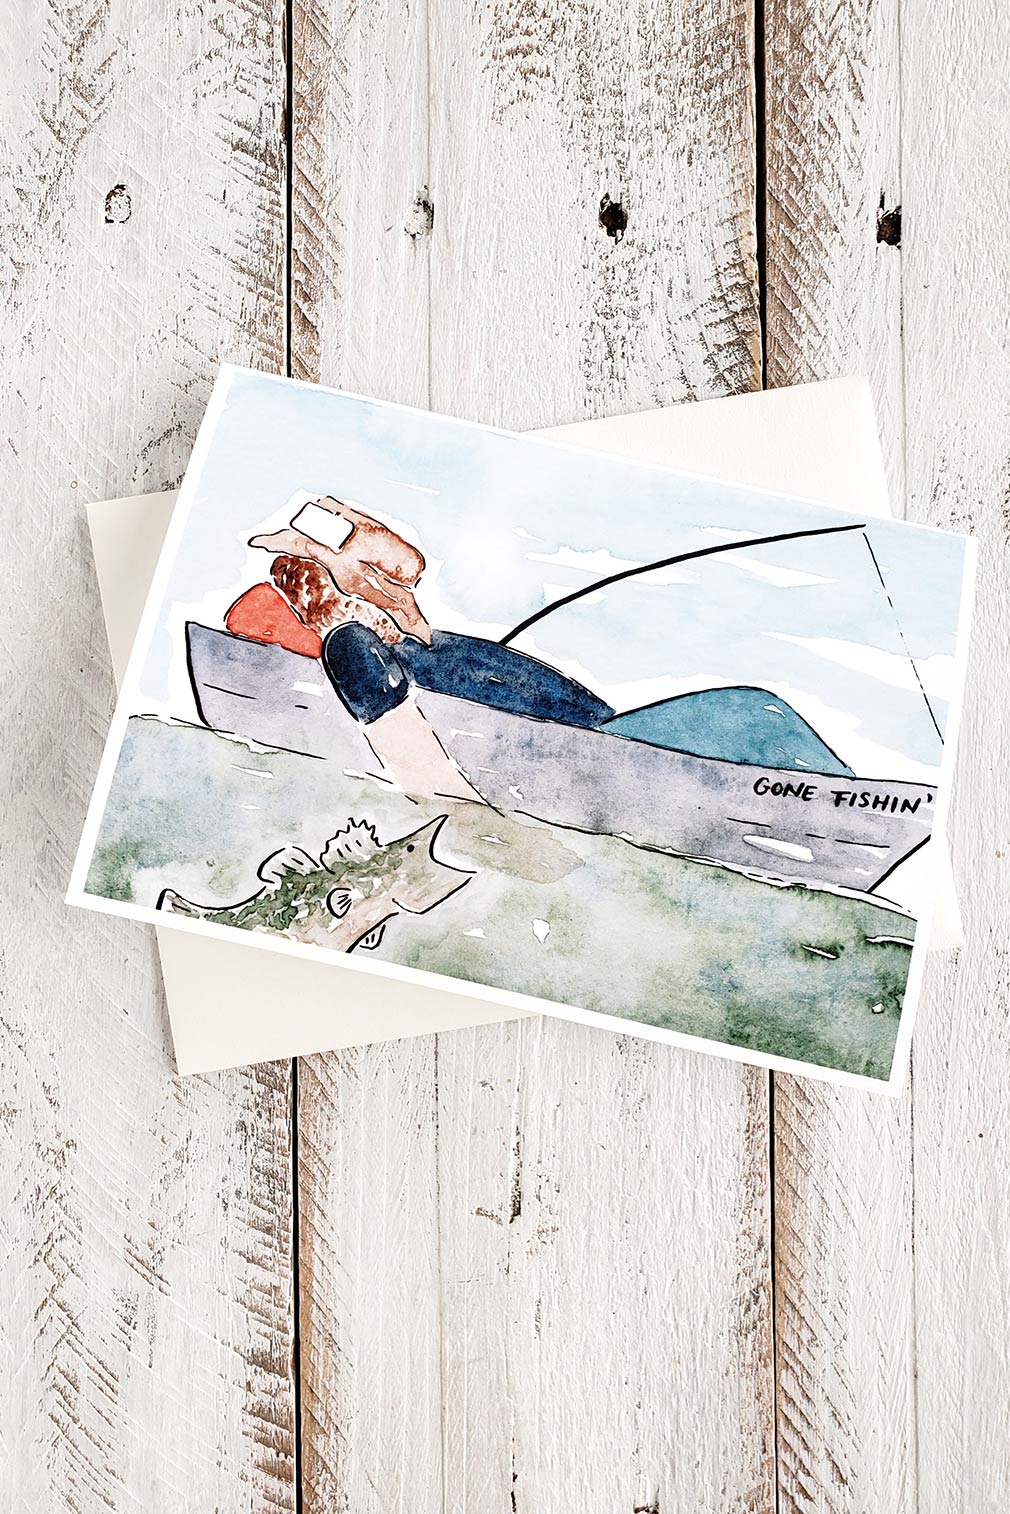 Sleeping Fisherman Greeting Card - The Painted Pen The Painted Pen